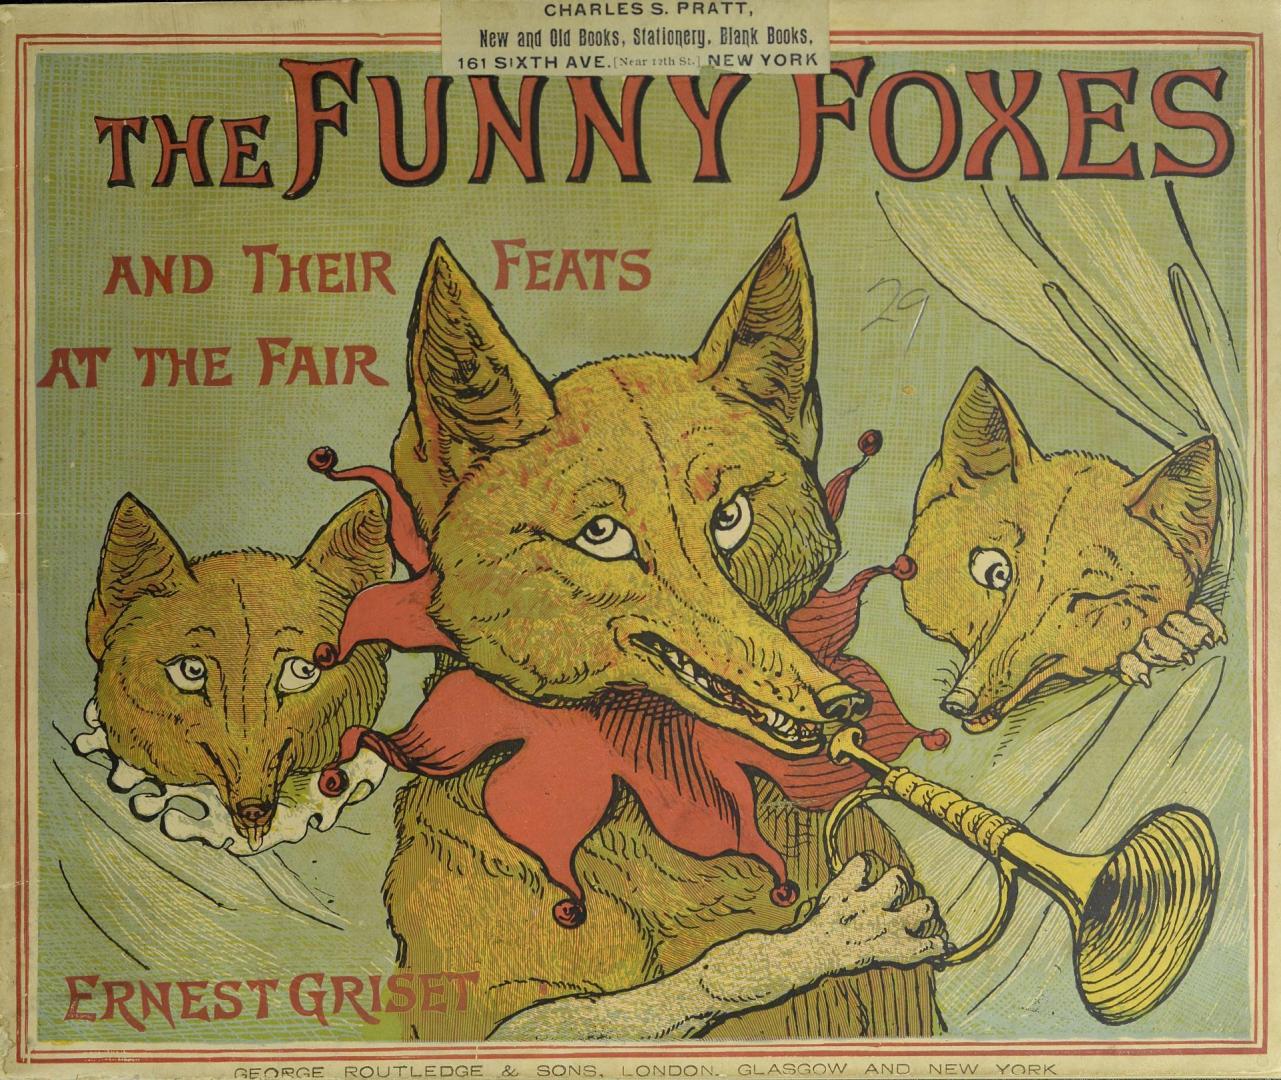 The funny foxes and their feats at the fair